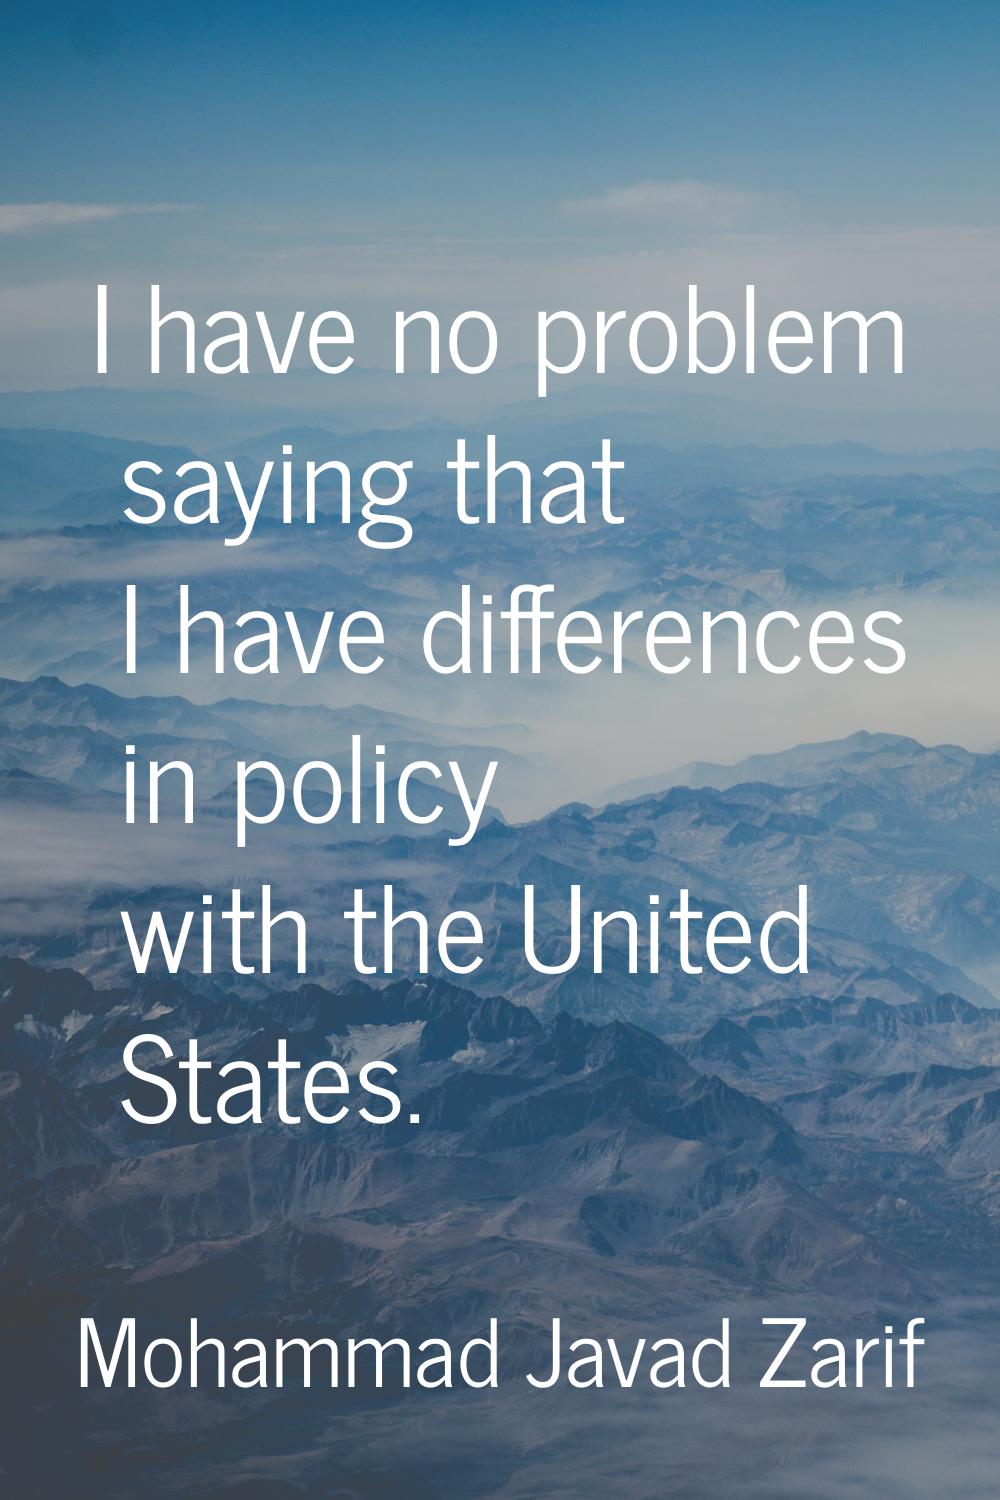 I have no problem saying that I have differences in policy with the United States.